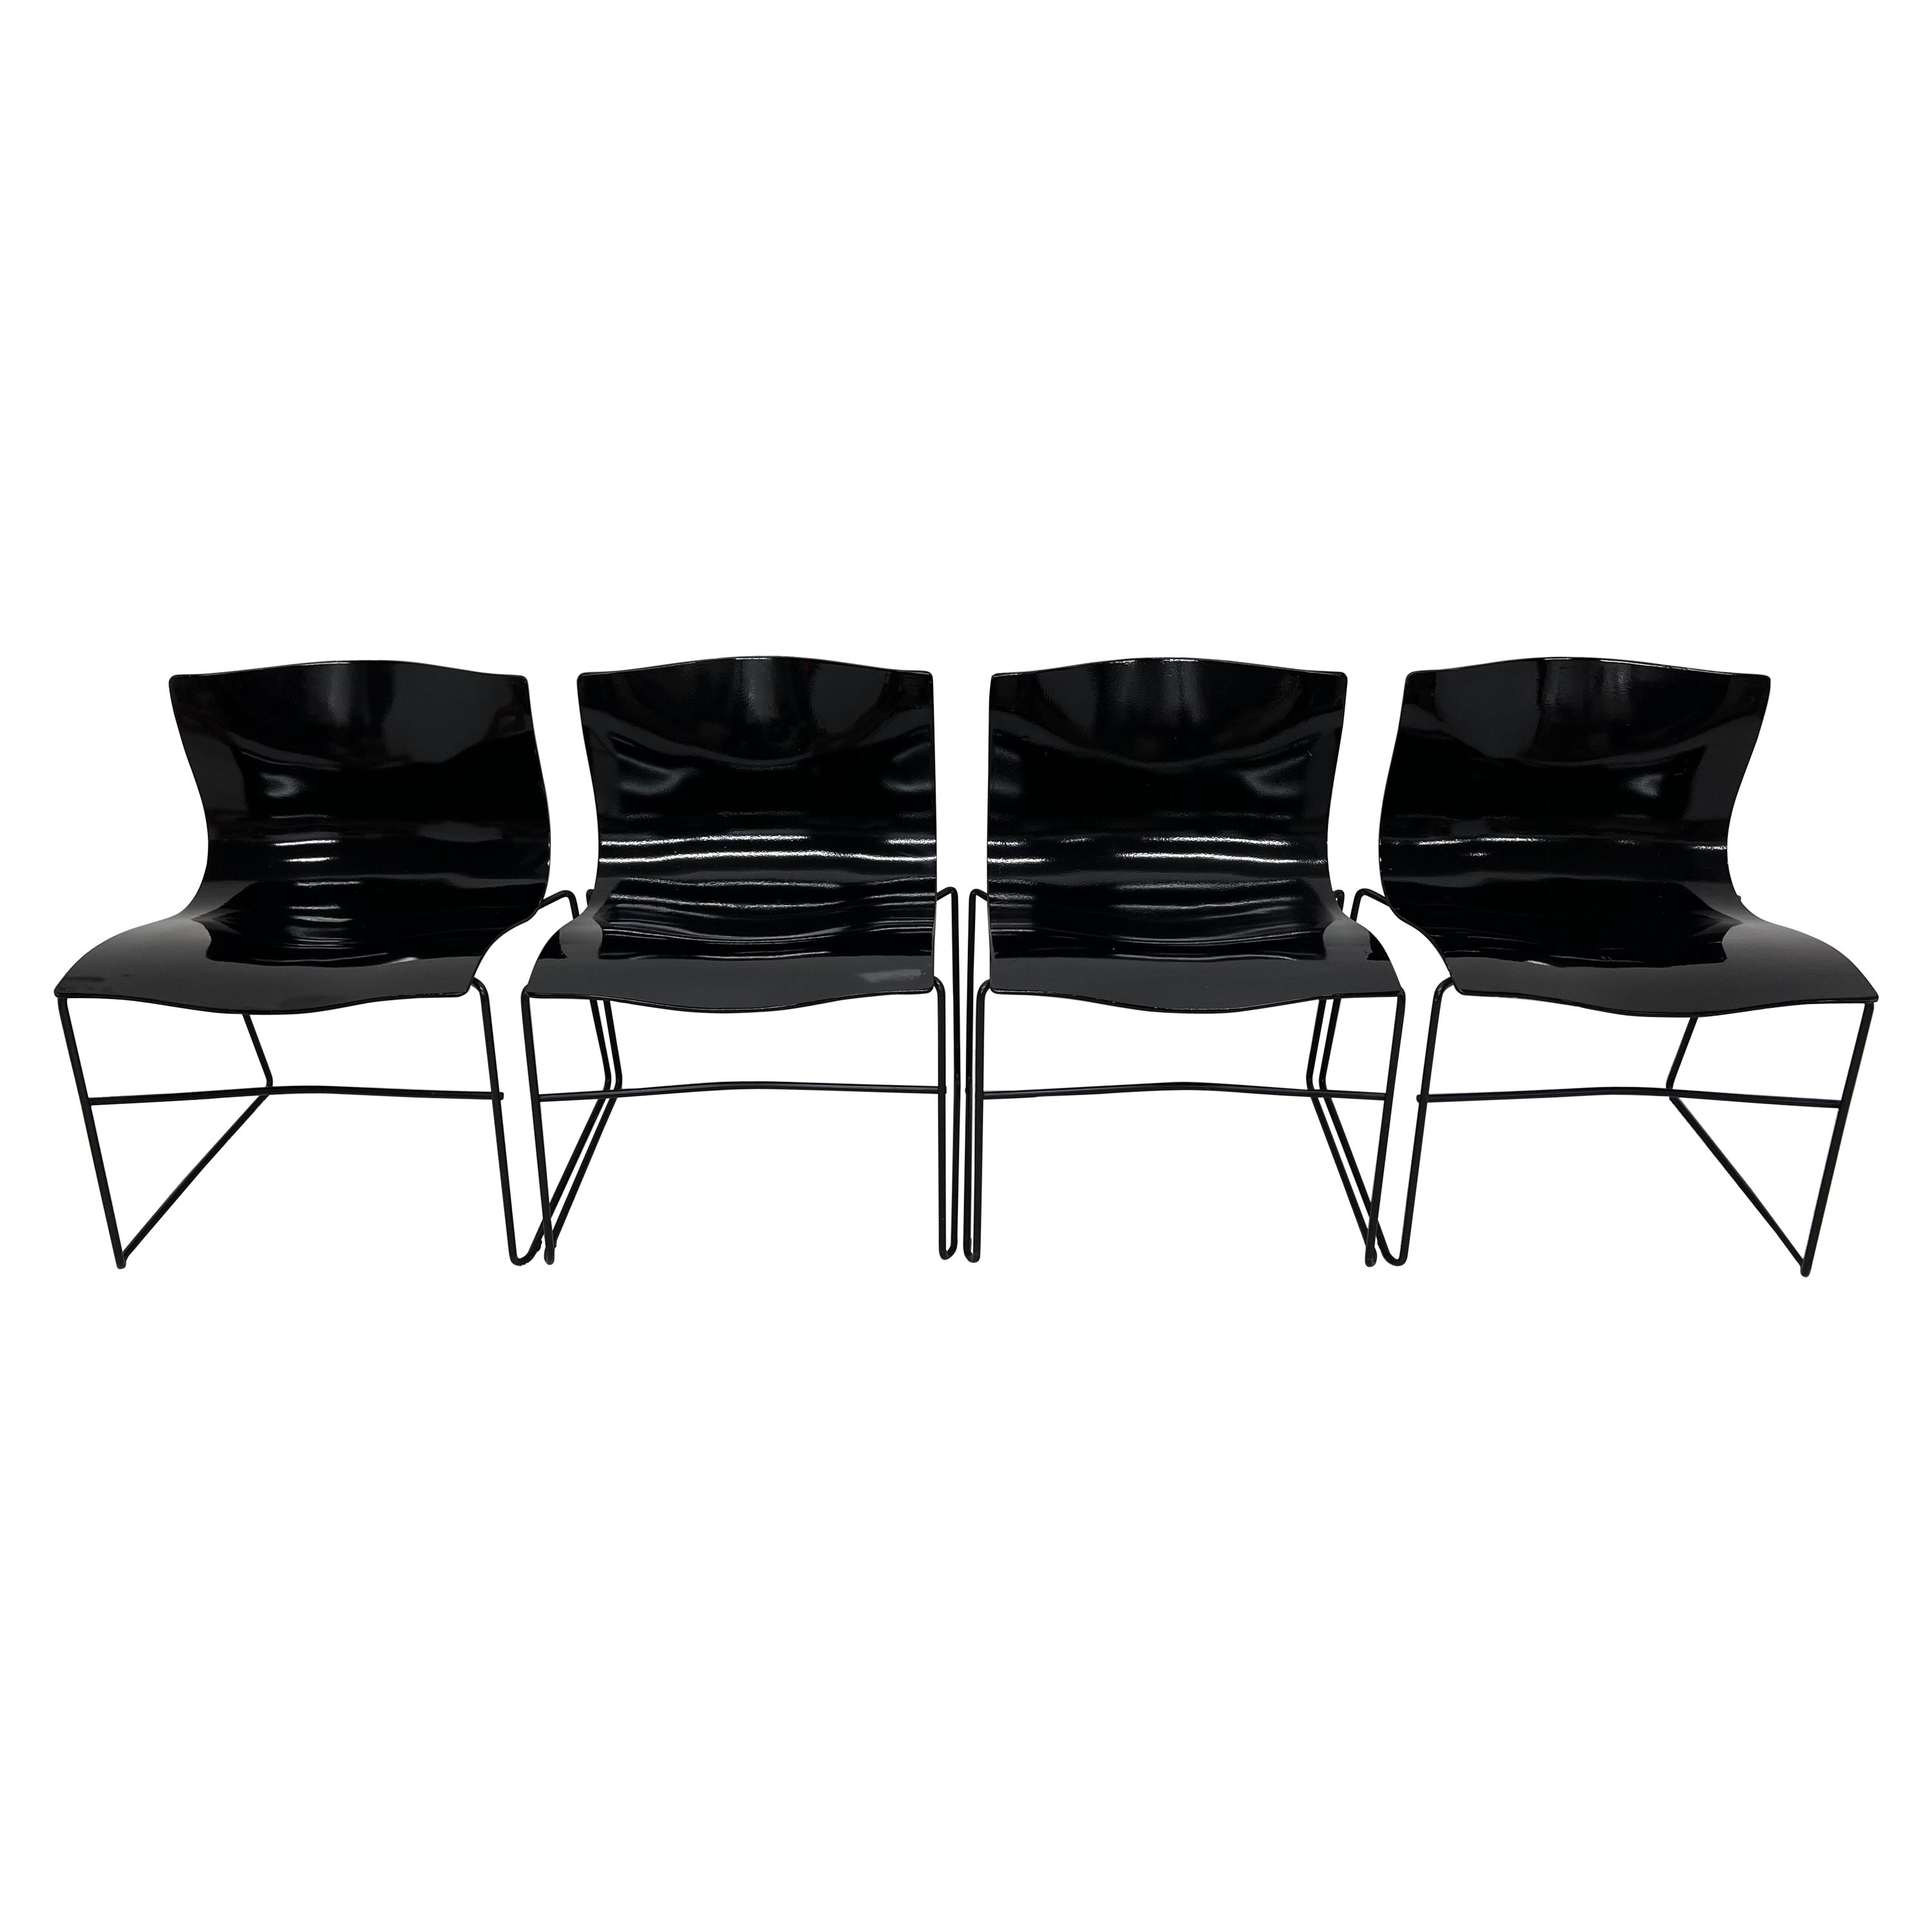 Lella and Massimo Vignelli Handkerchief Chairs for Knoll, Set of Four